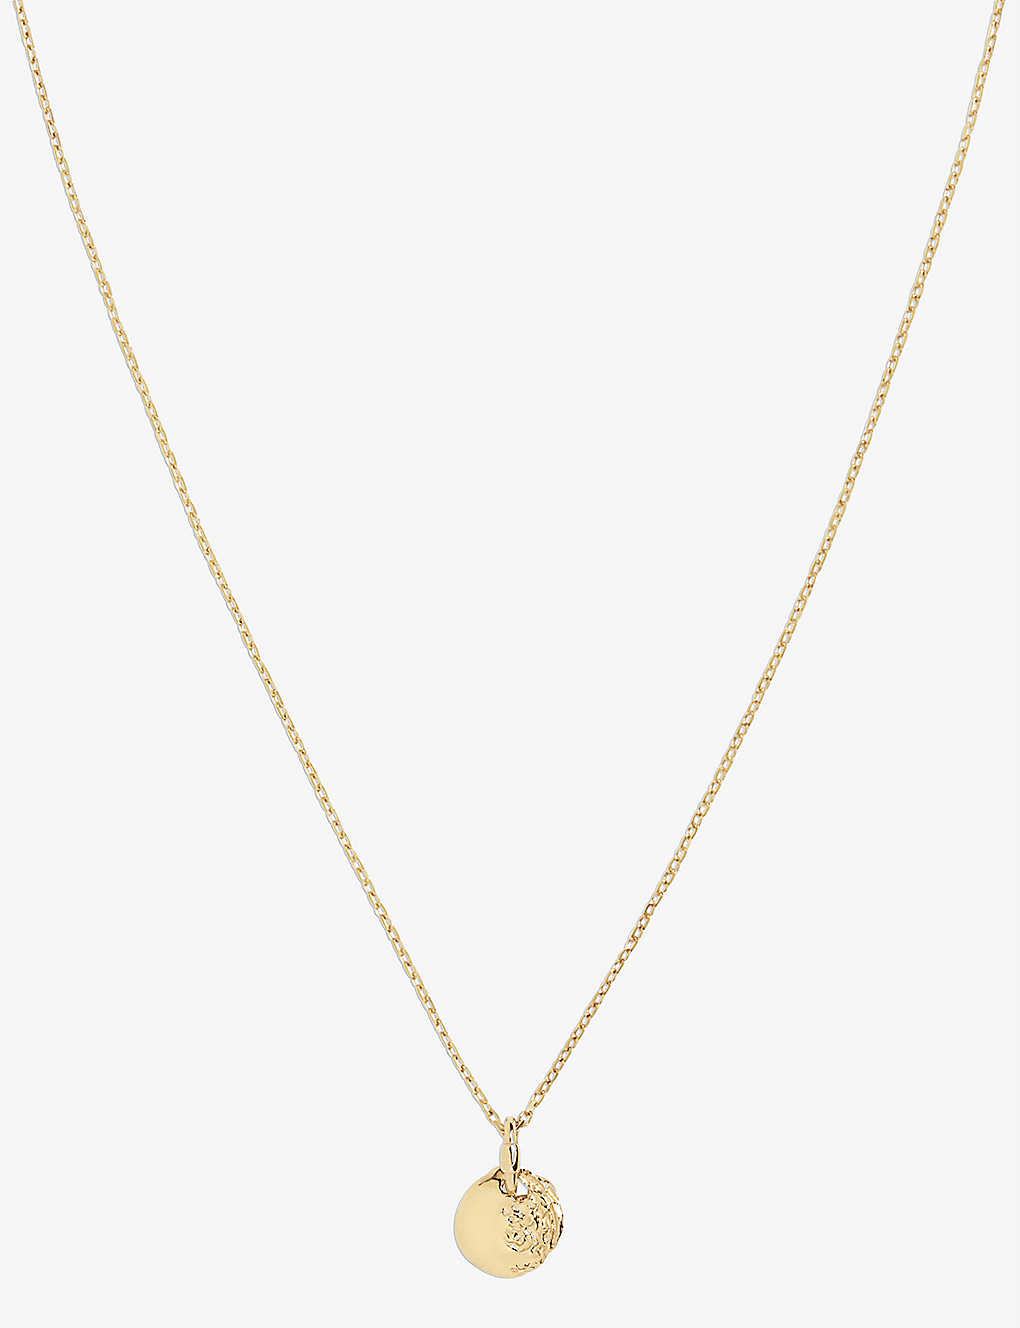 Maria Black Aspen 22ct Gold-plated 925 Sterling-silver Pendant Necklace